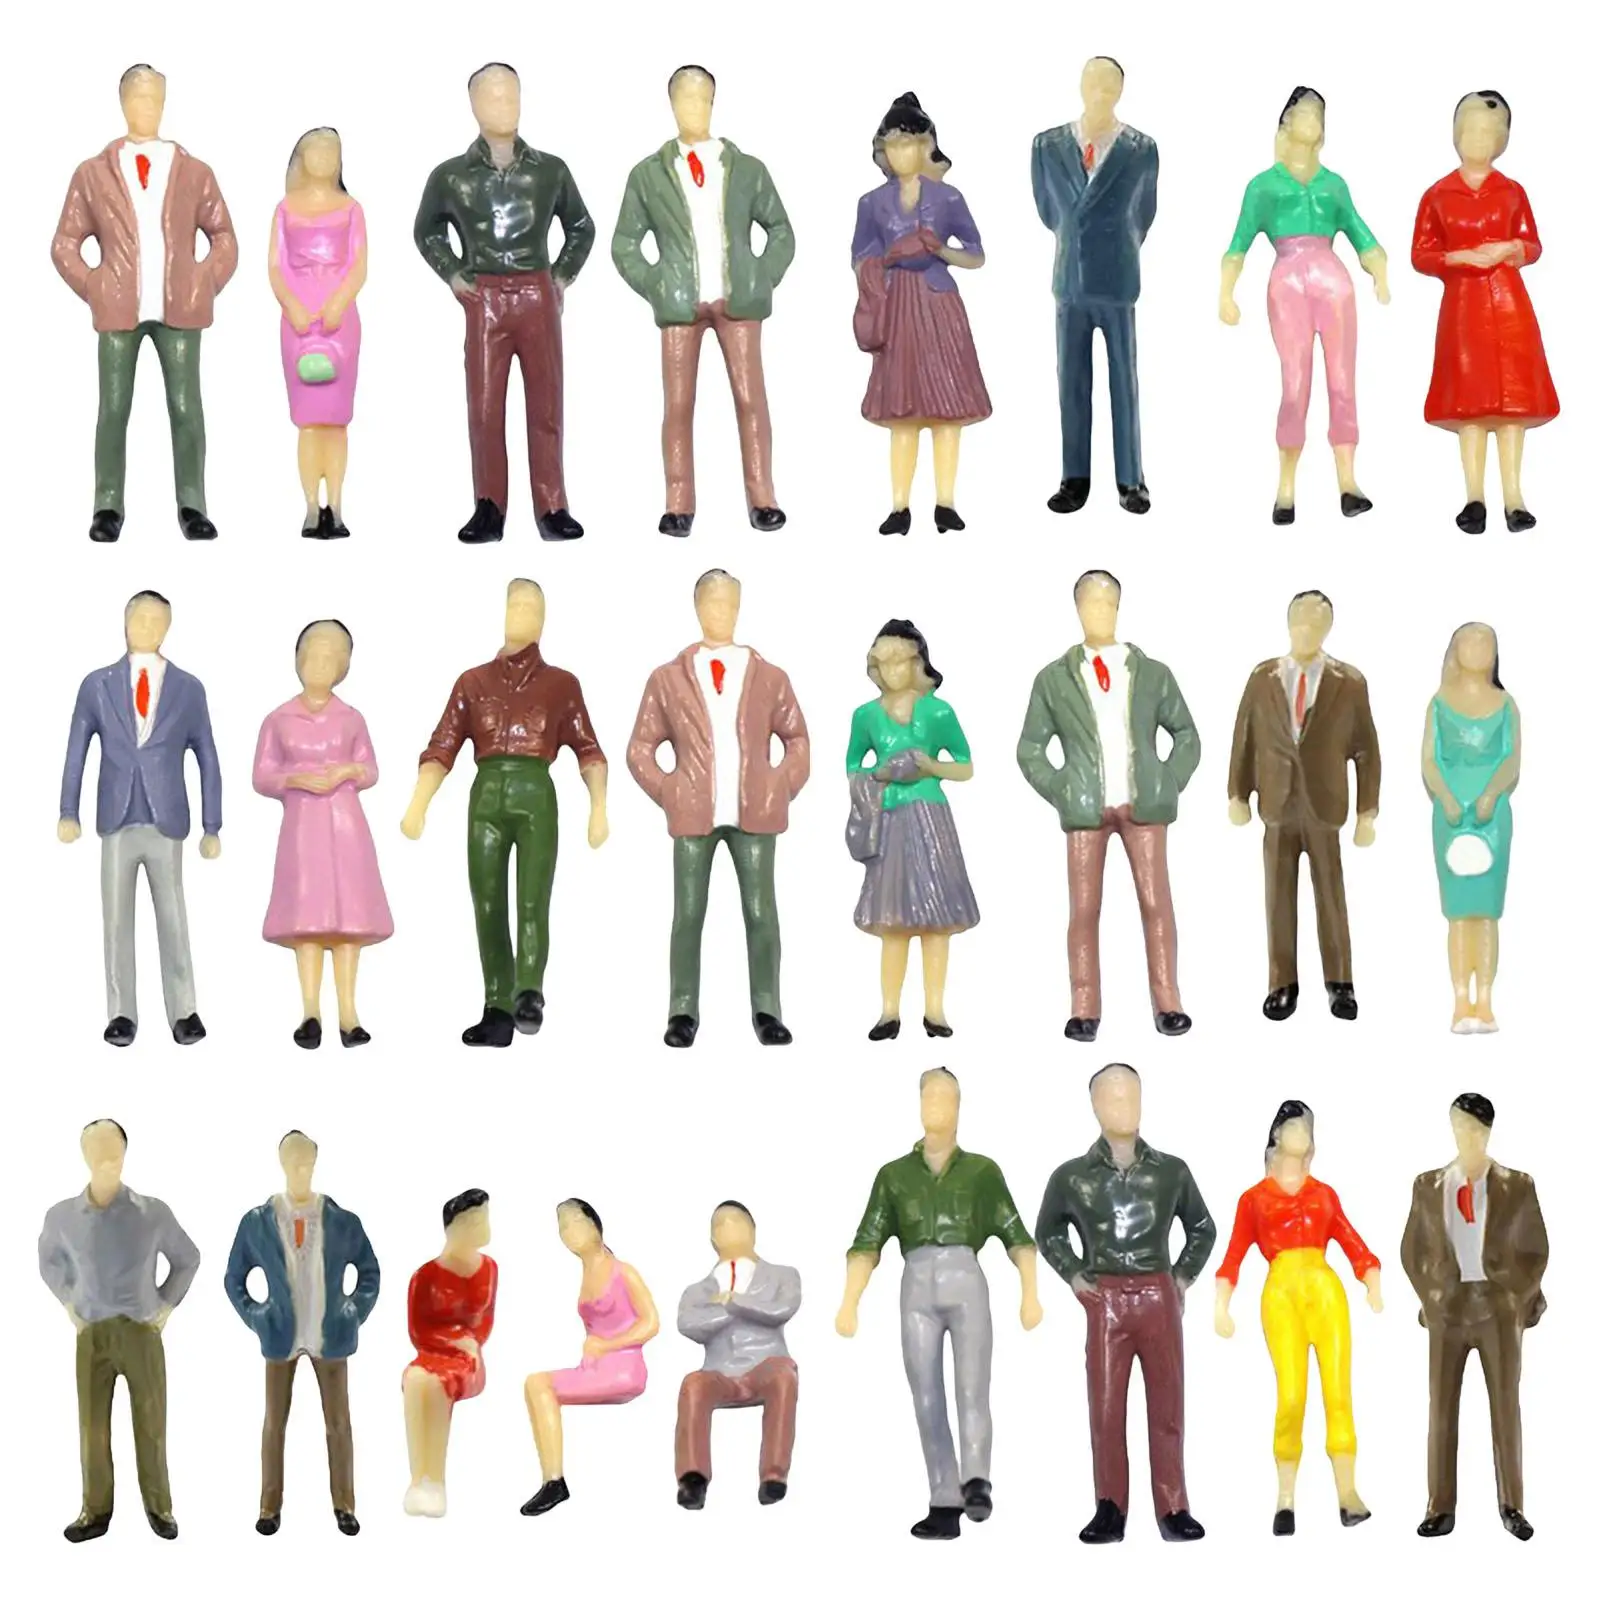 50x 1/50 People Figures Painted Passengers Tiny People for Train Mini Dollhouses